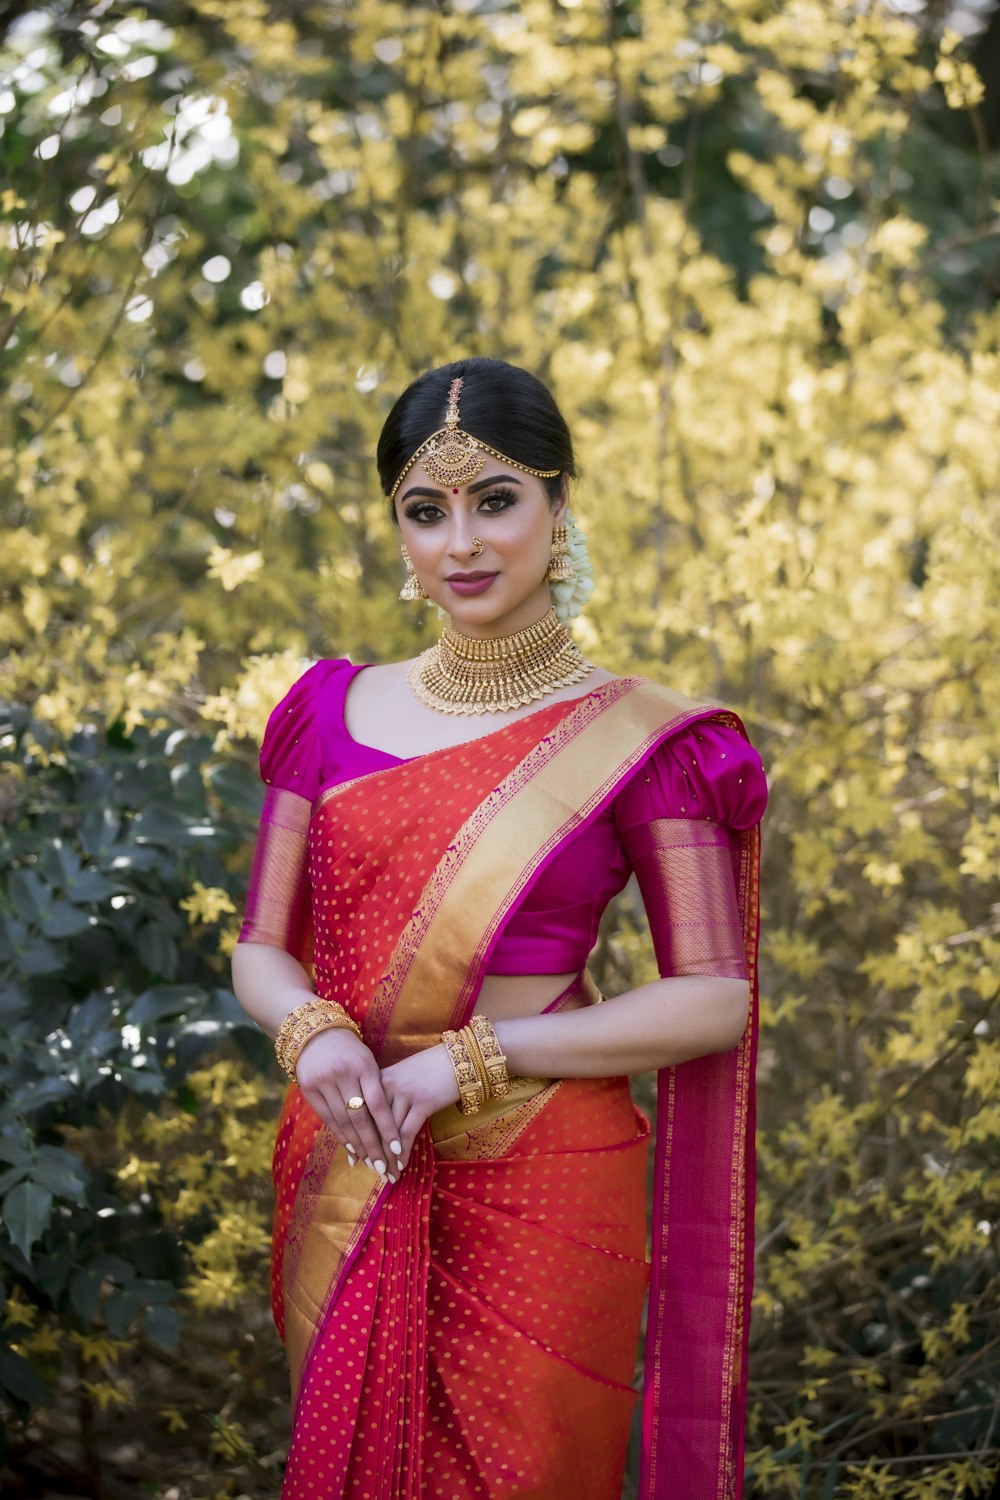 woman in red and white sari standing near green trees during daytime